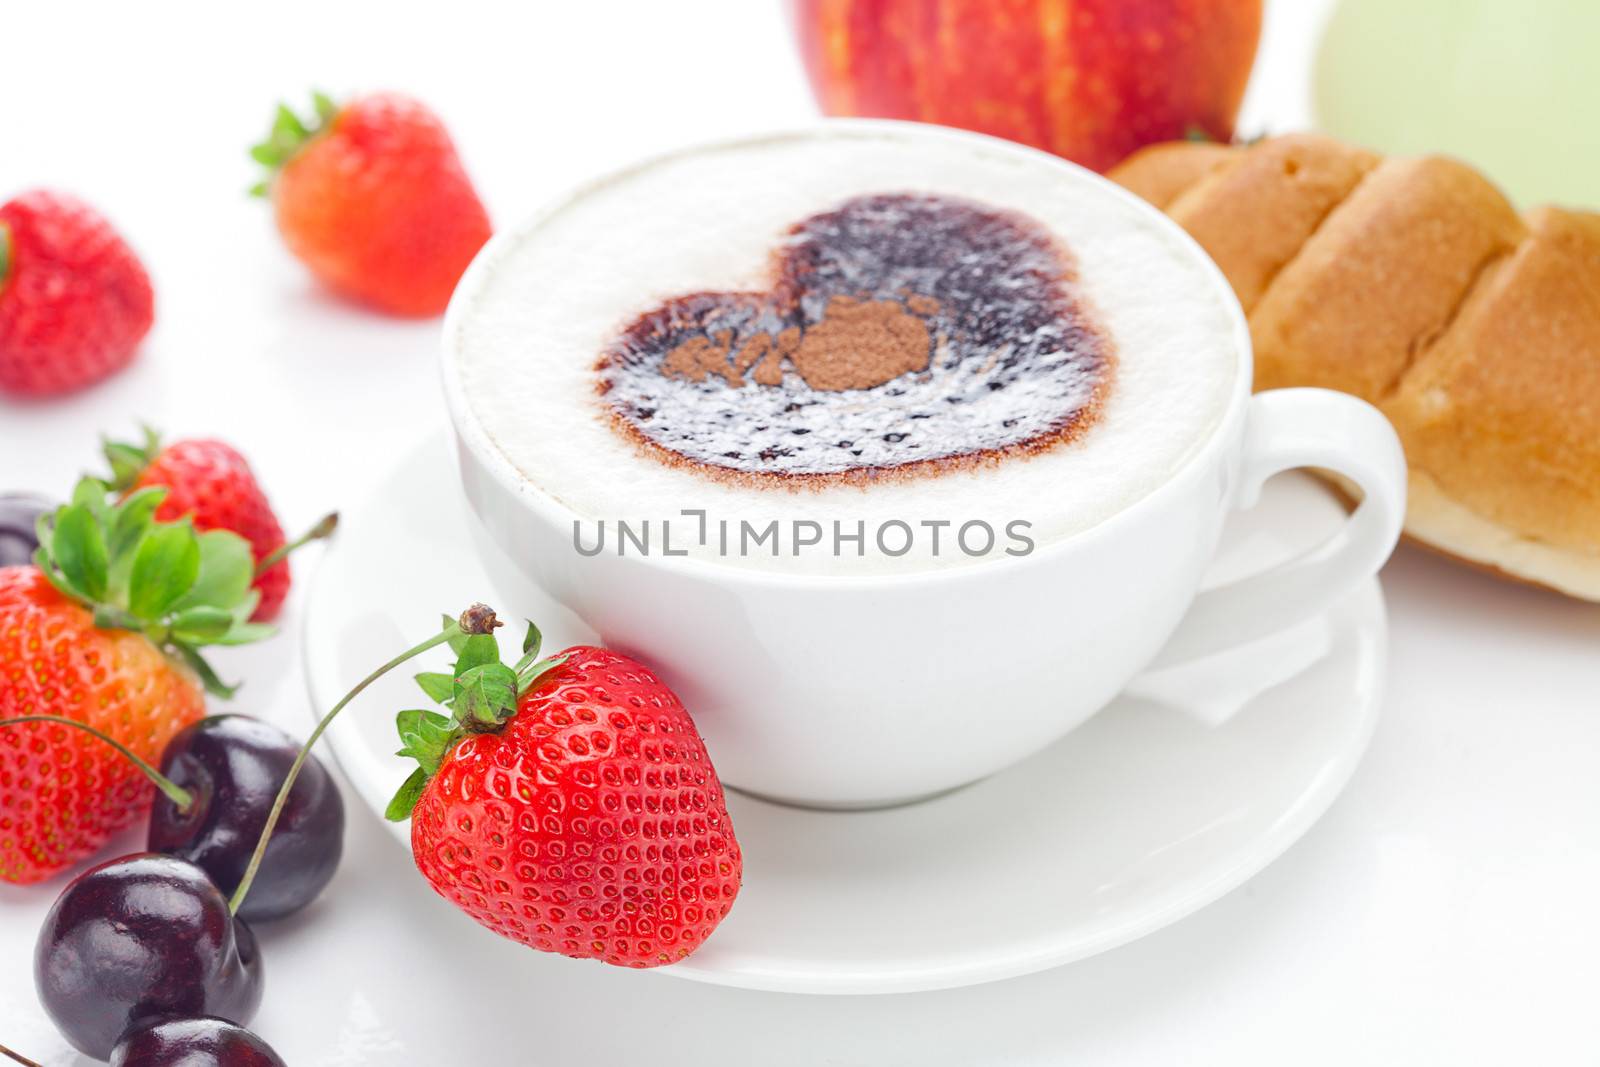 cappuccino in a cup in the shape of hearts,cherry,croissant  and strawberries isolated on white